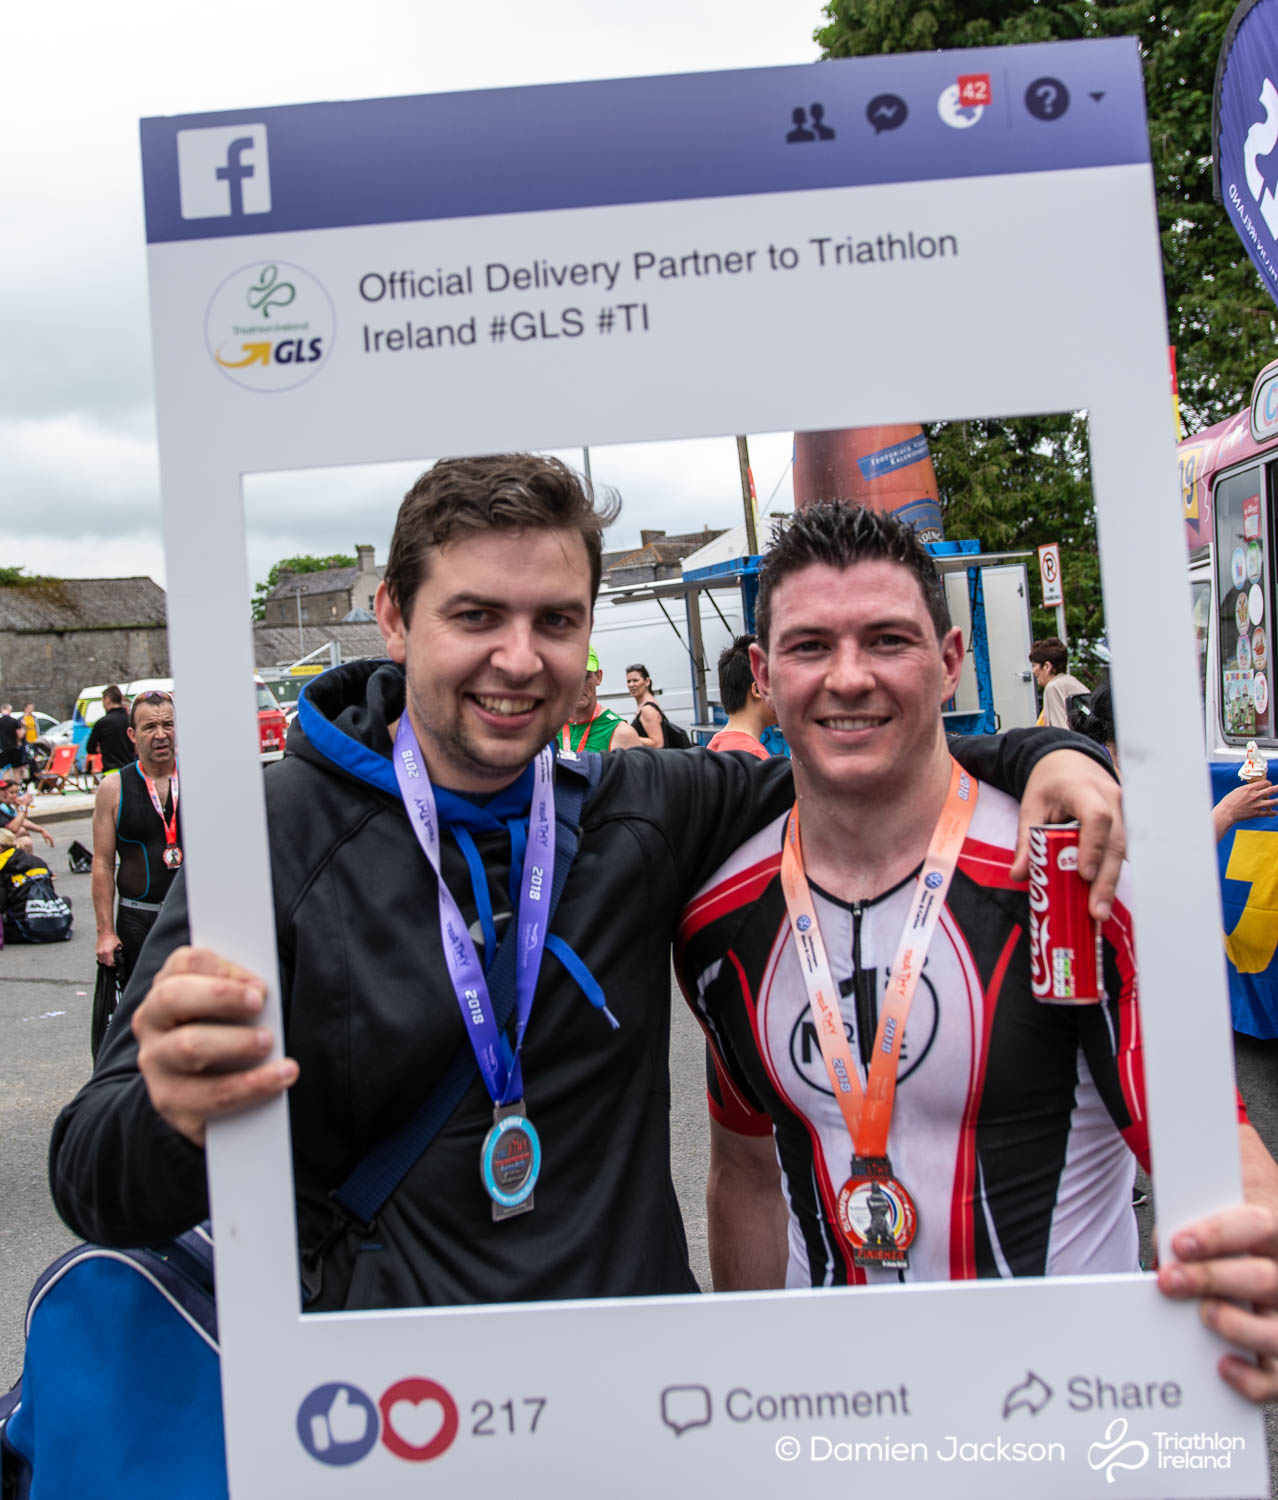 Athy_2018 (459 of 526) - TriAthy - XII Edition - 2nd June 2018